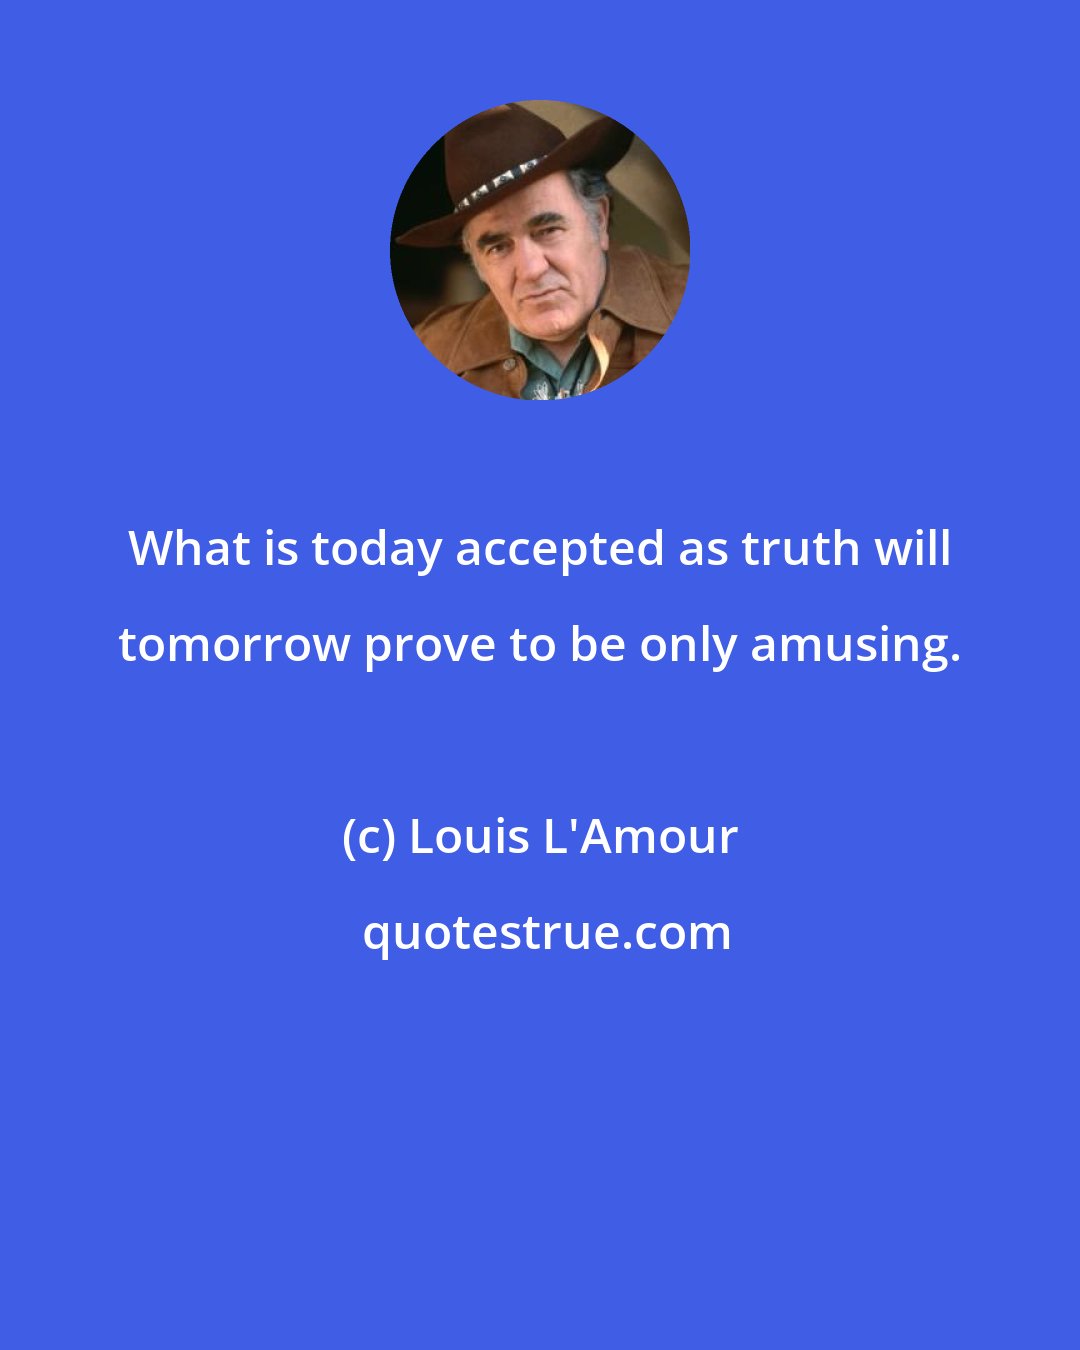 Louis L'Amour: What is today accepted as truth will tomorrow prove to be only amusing.